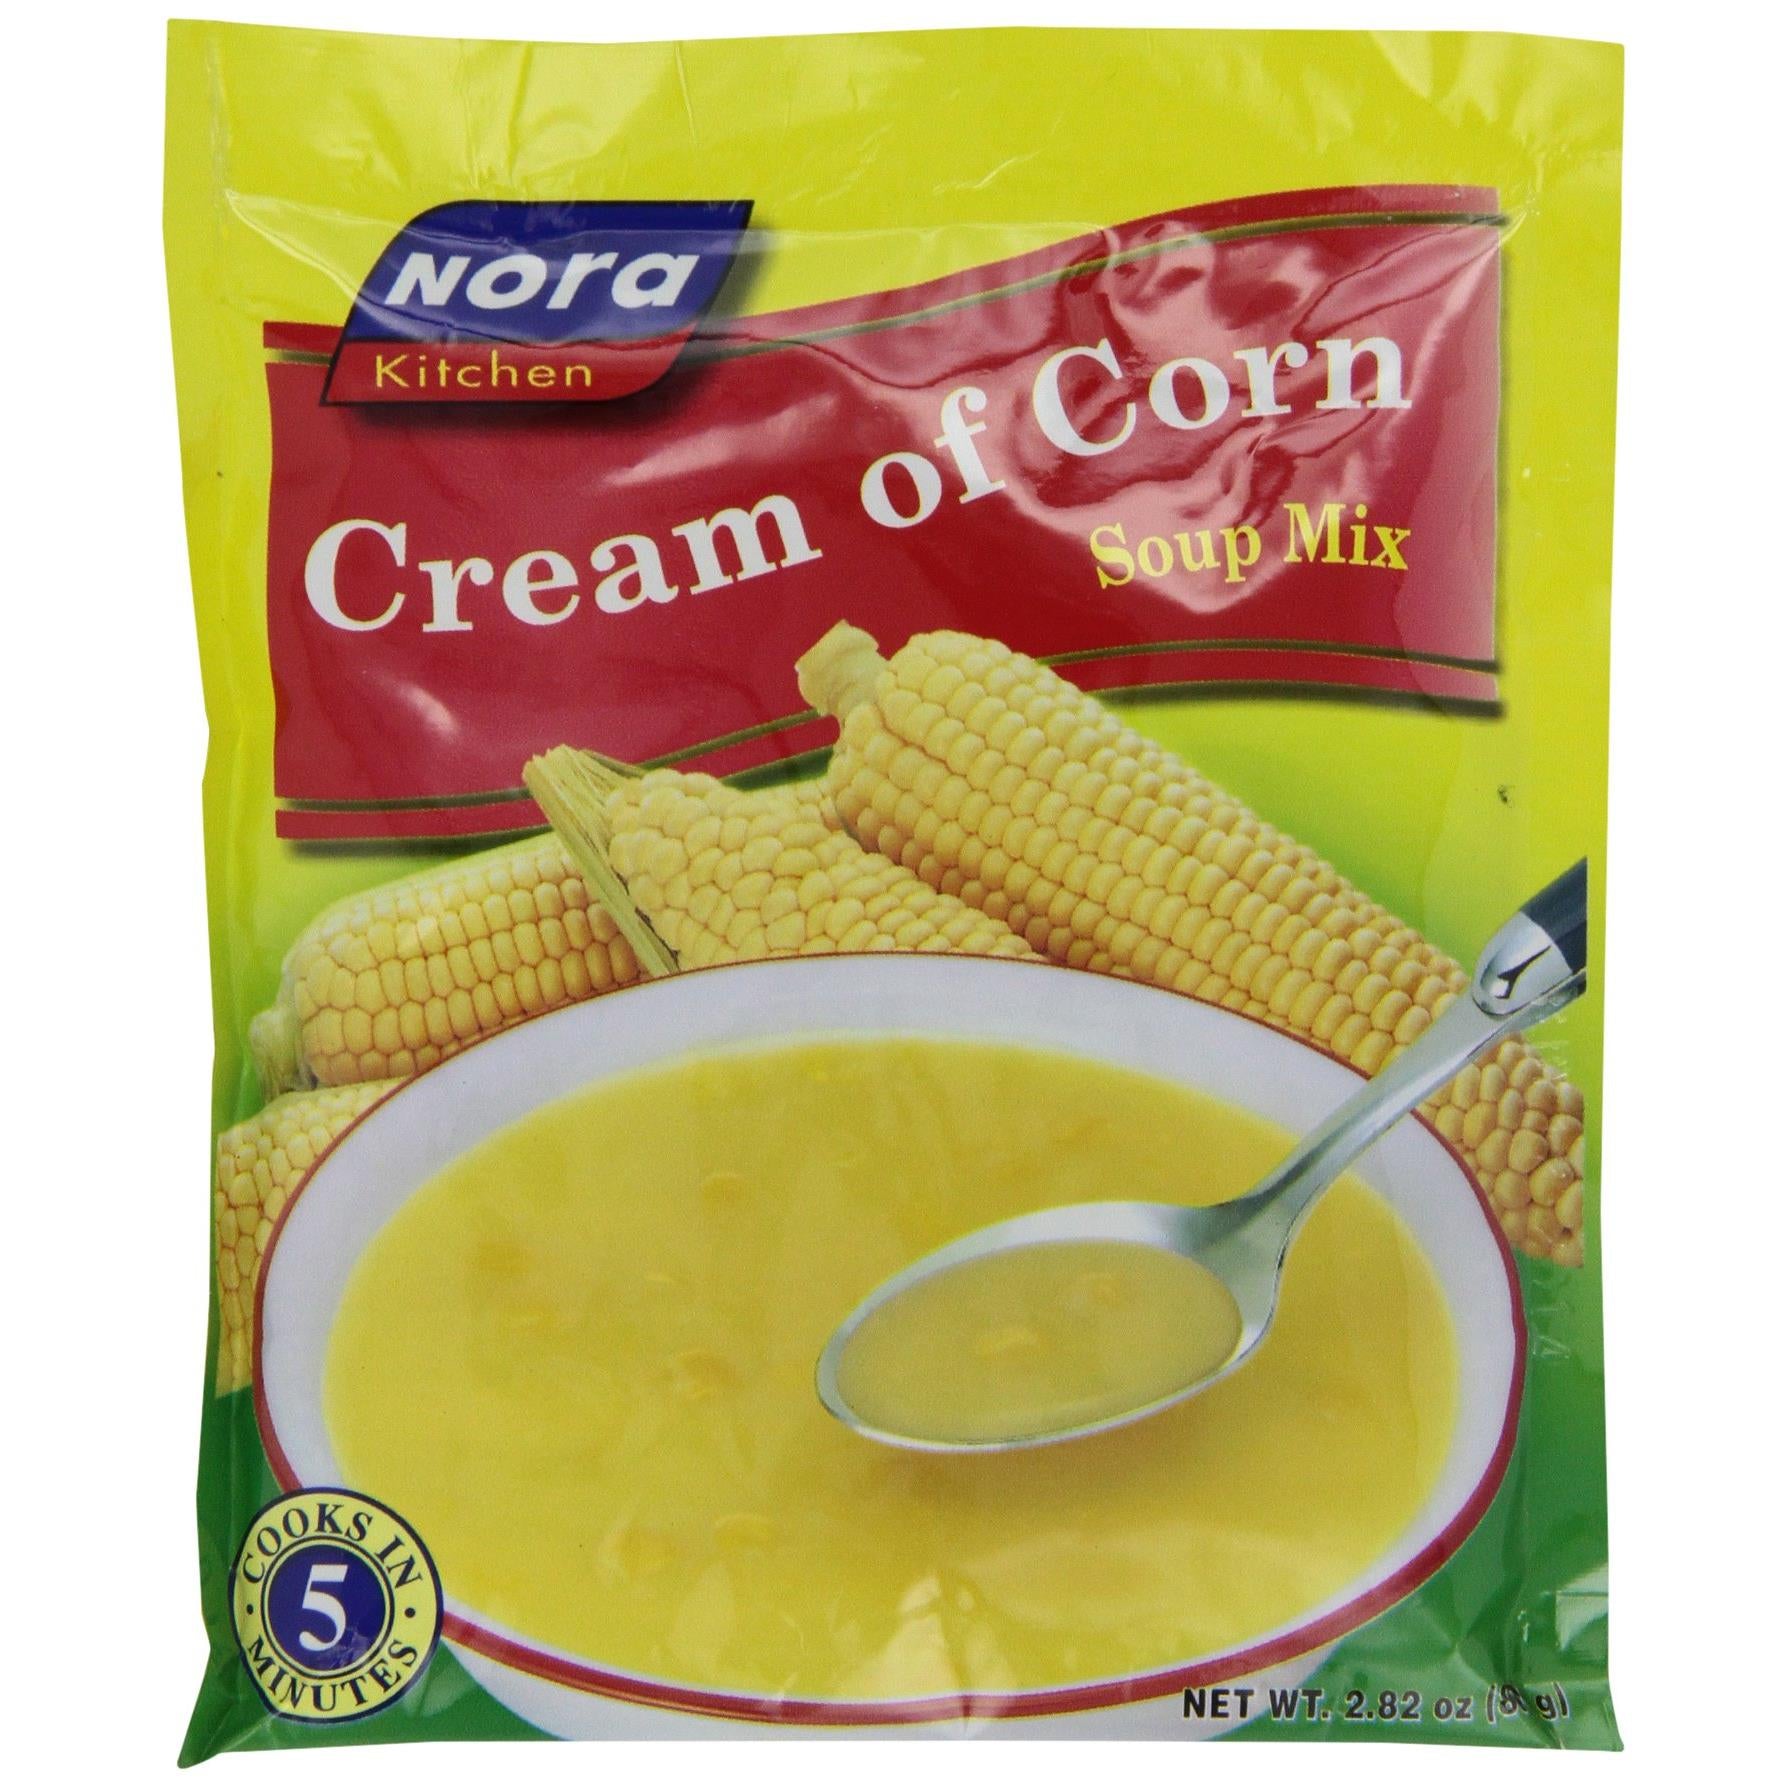 Nora Cream of Corn Soup Mix, 2.82-Ounce (Pack of 6)